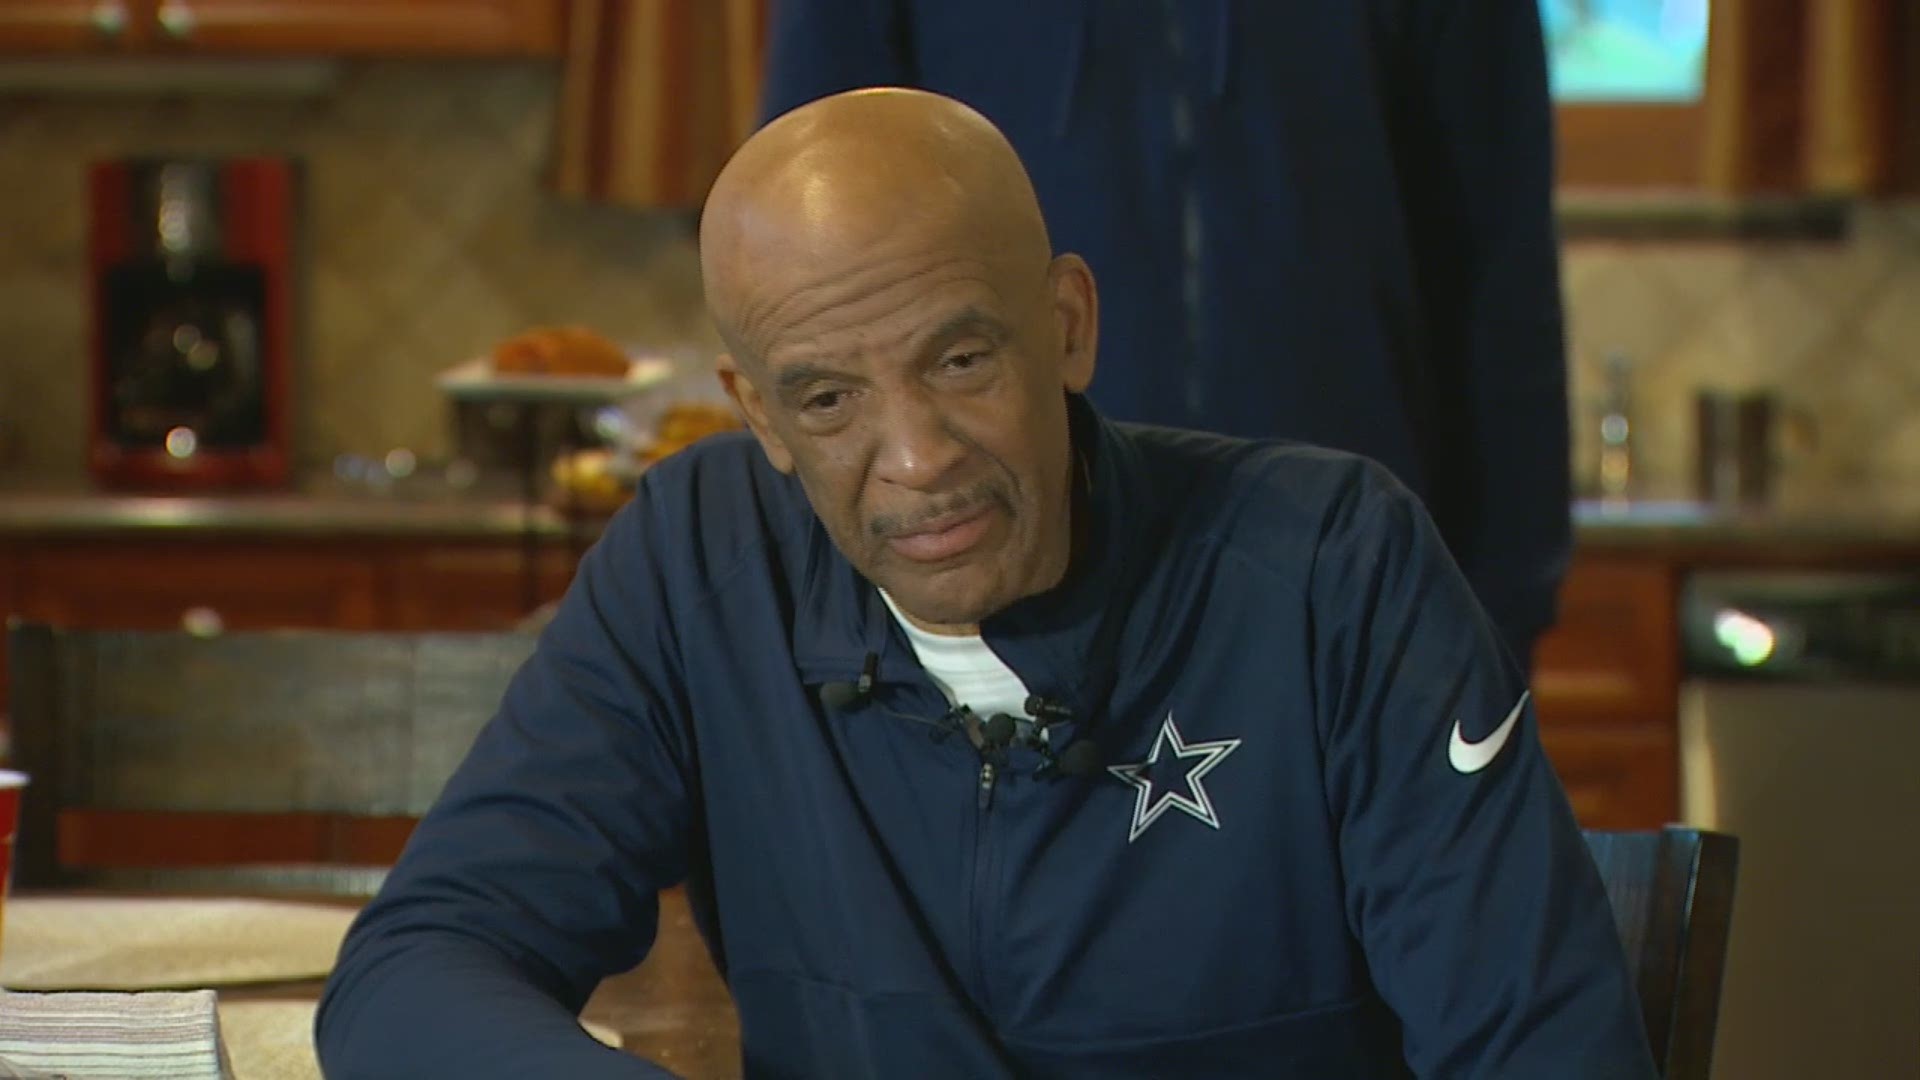 "They broke my heart. And they did it like this, they strung it out like this," said Drew Pearson, former Dallas Cowboys wide receiver.